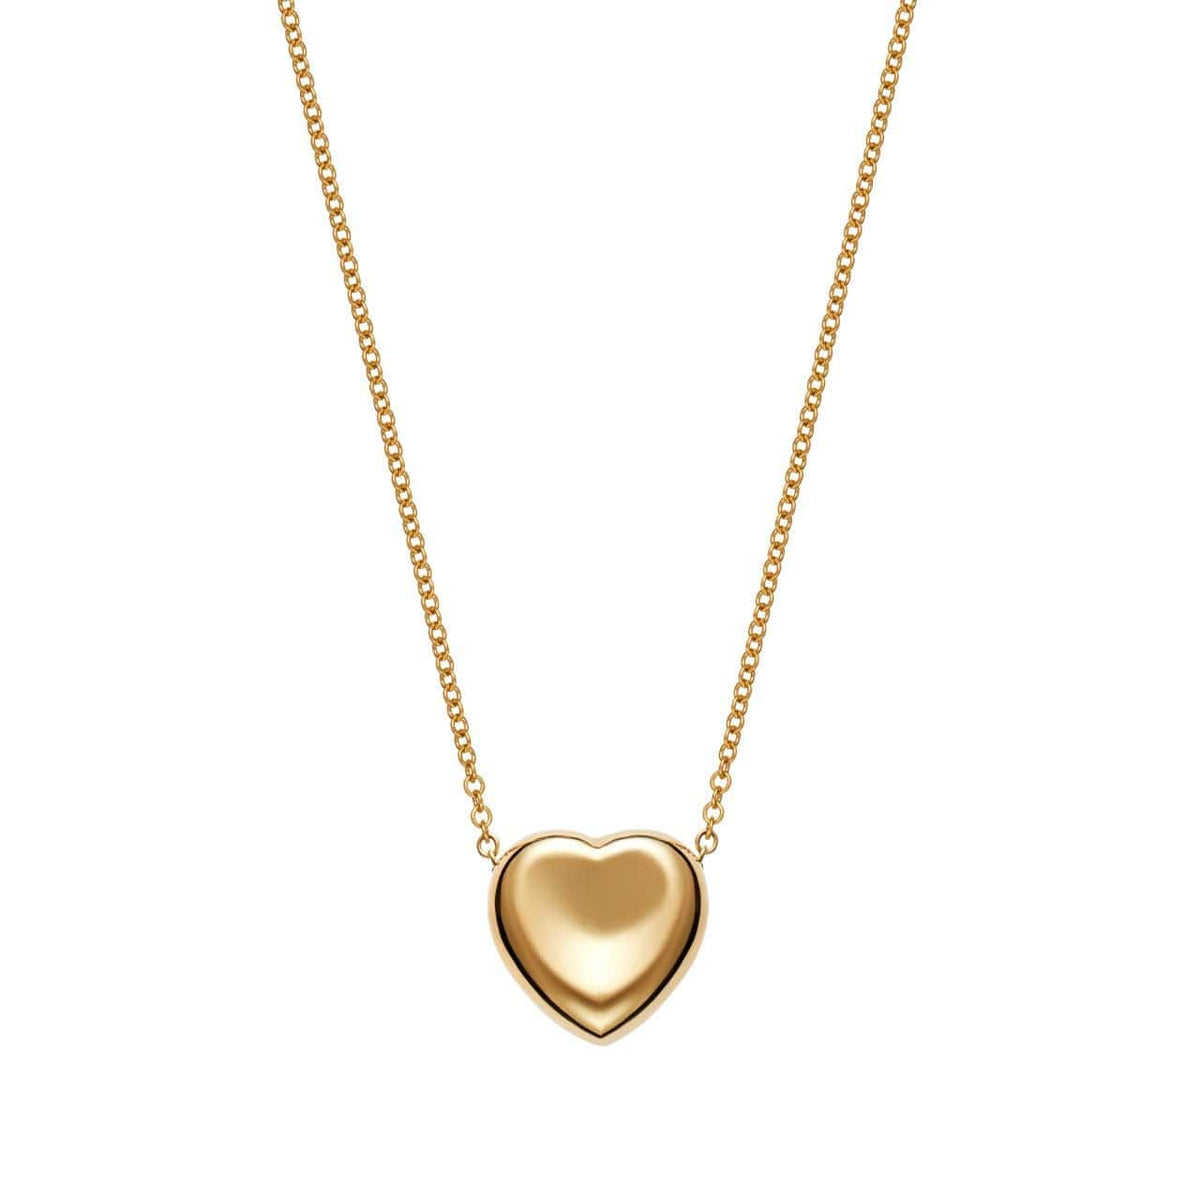 18K Yellow Gold Puffy Heart Pendant Necklace